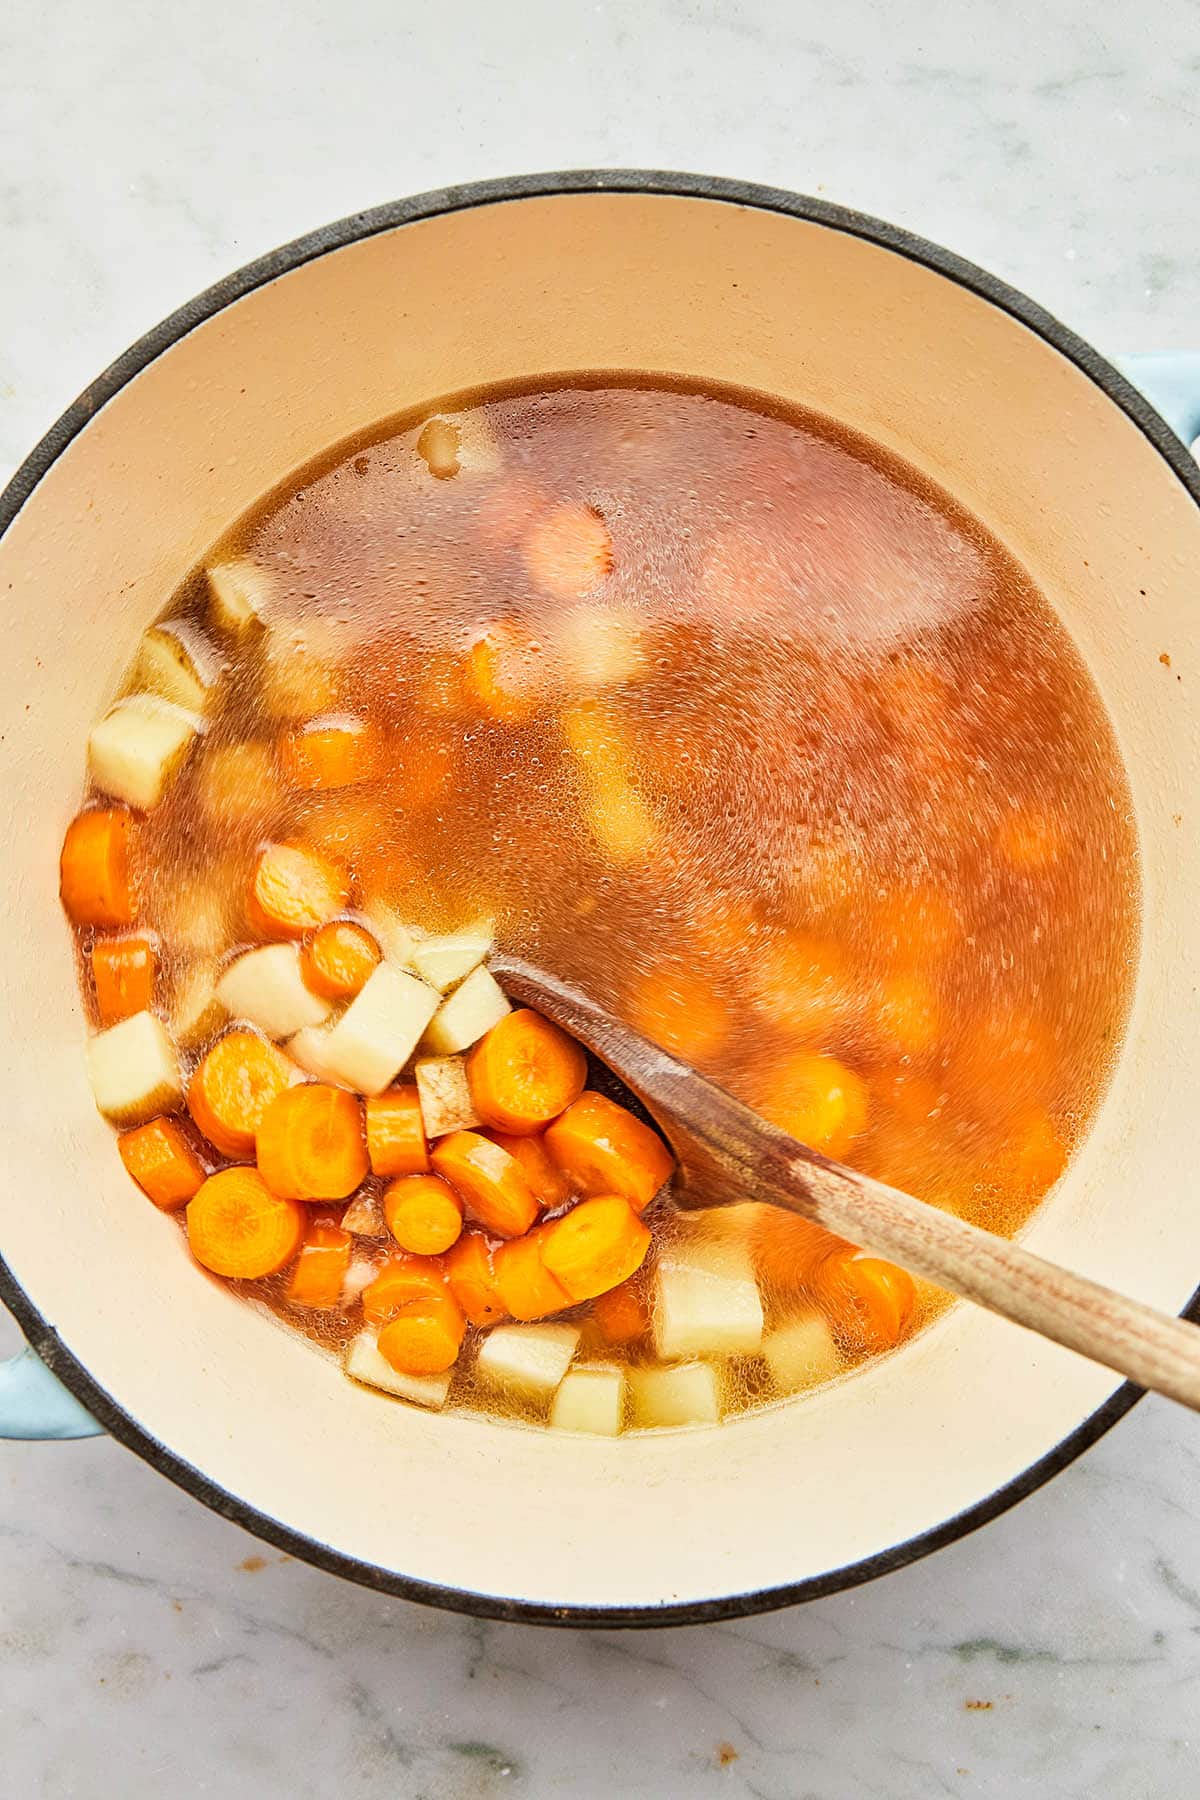 A wooden spoon stirring a pot of water with cooked carrots and potatoes inside.